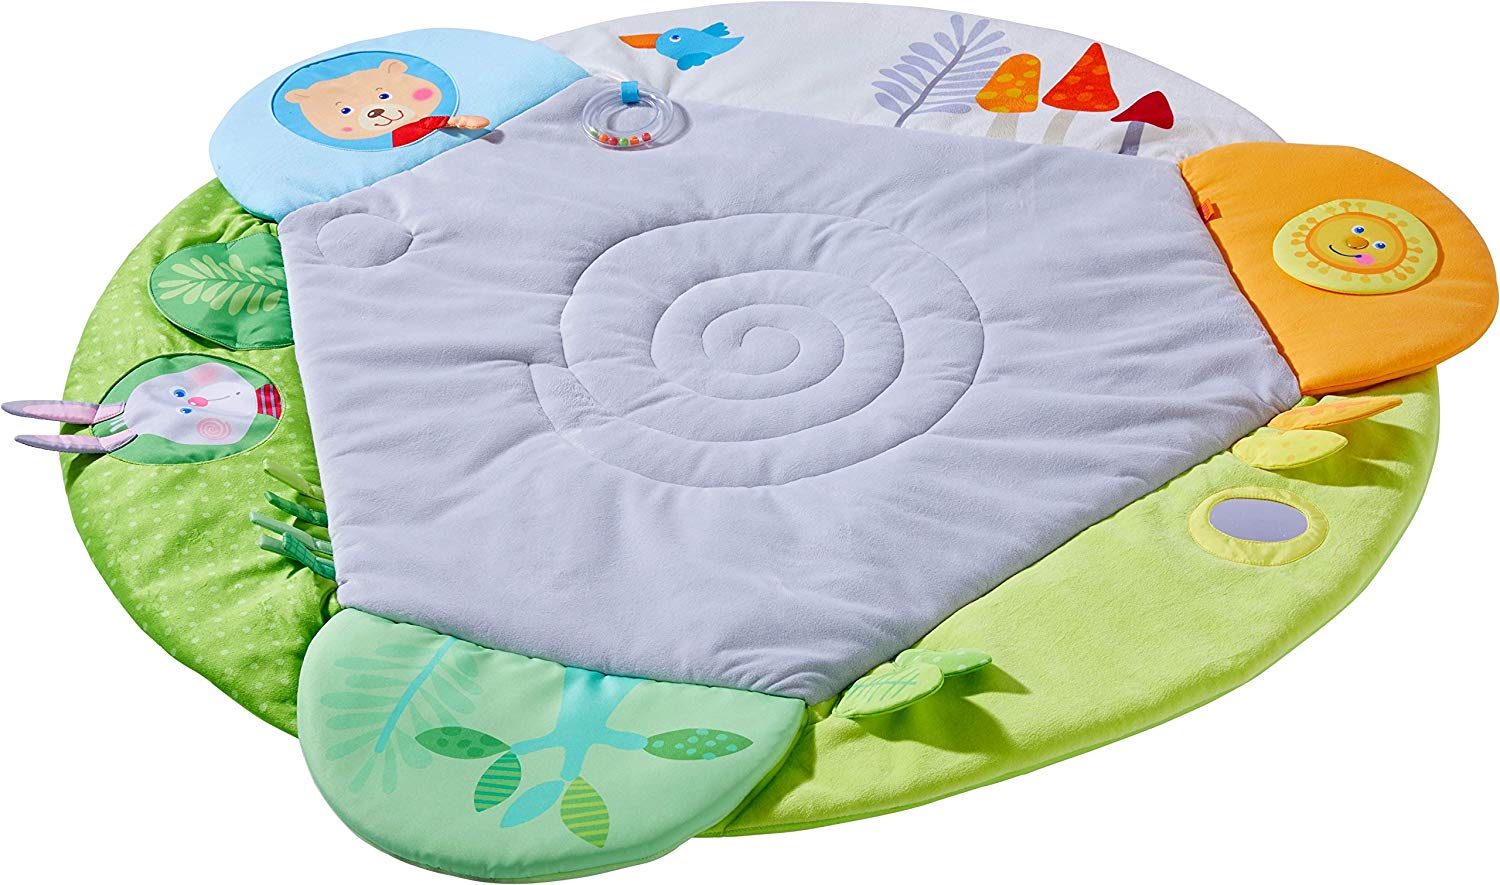 Haba 304391 Cuddly Nest Play Mat With Many Sensing Elements And Removable R